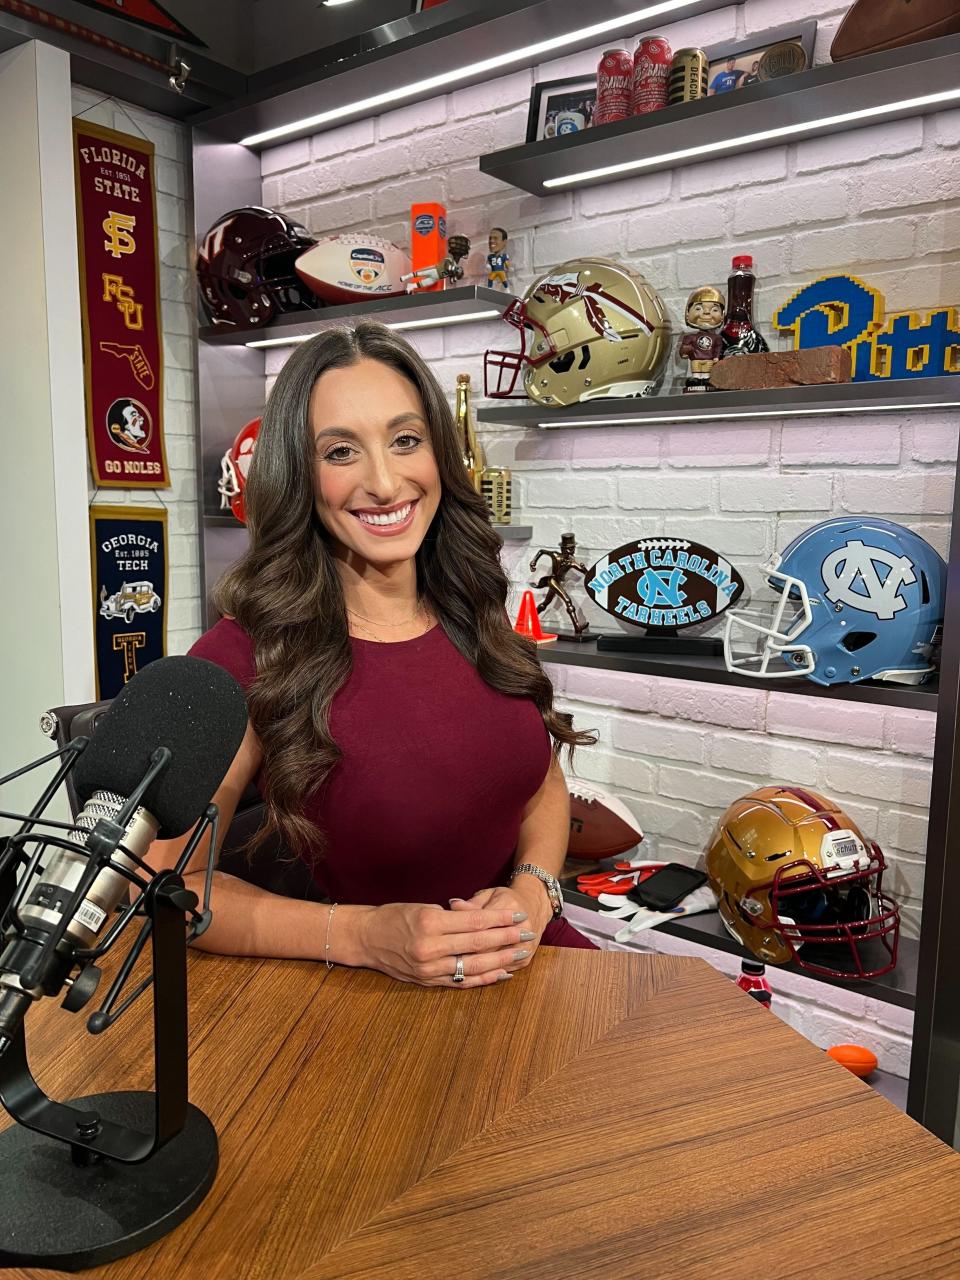 Taylor Tannebaum, who earned her bachelor's degree from Florida State in 2013, has accepted an on-air talent job at ACC Network.